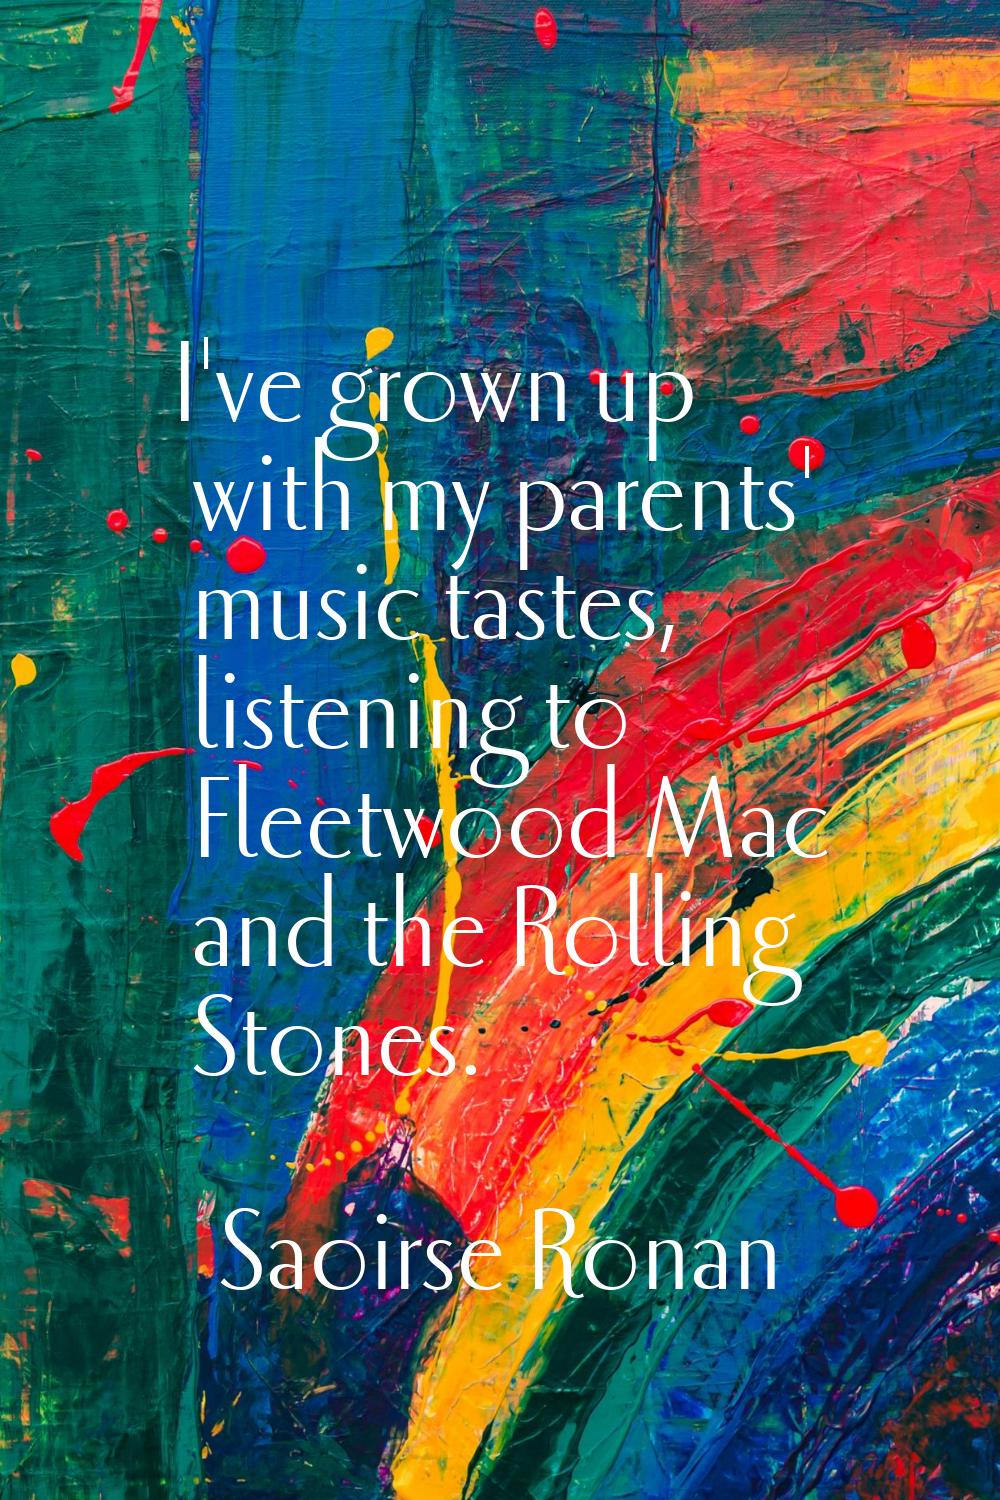 I've grown up with my parents' music tastes, listening to Fleetwood Mac and the Rolling Stones.